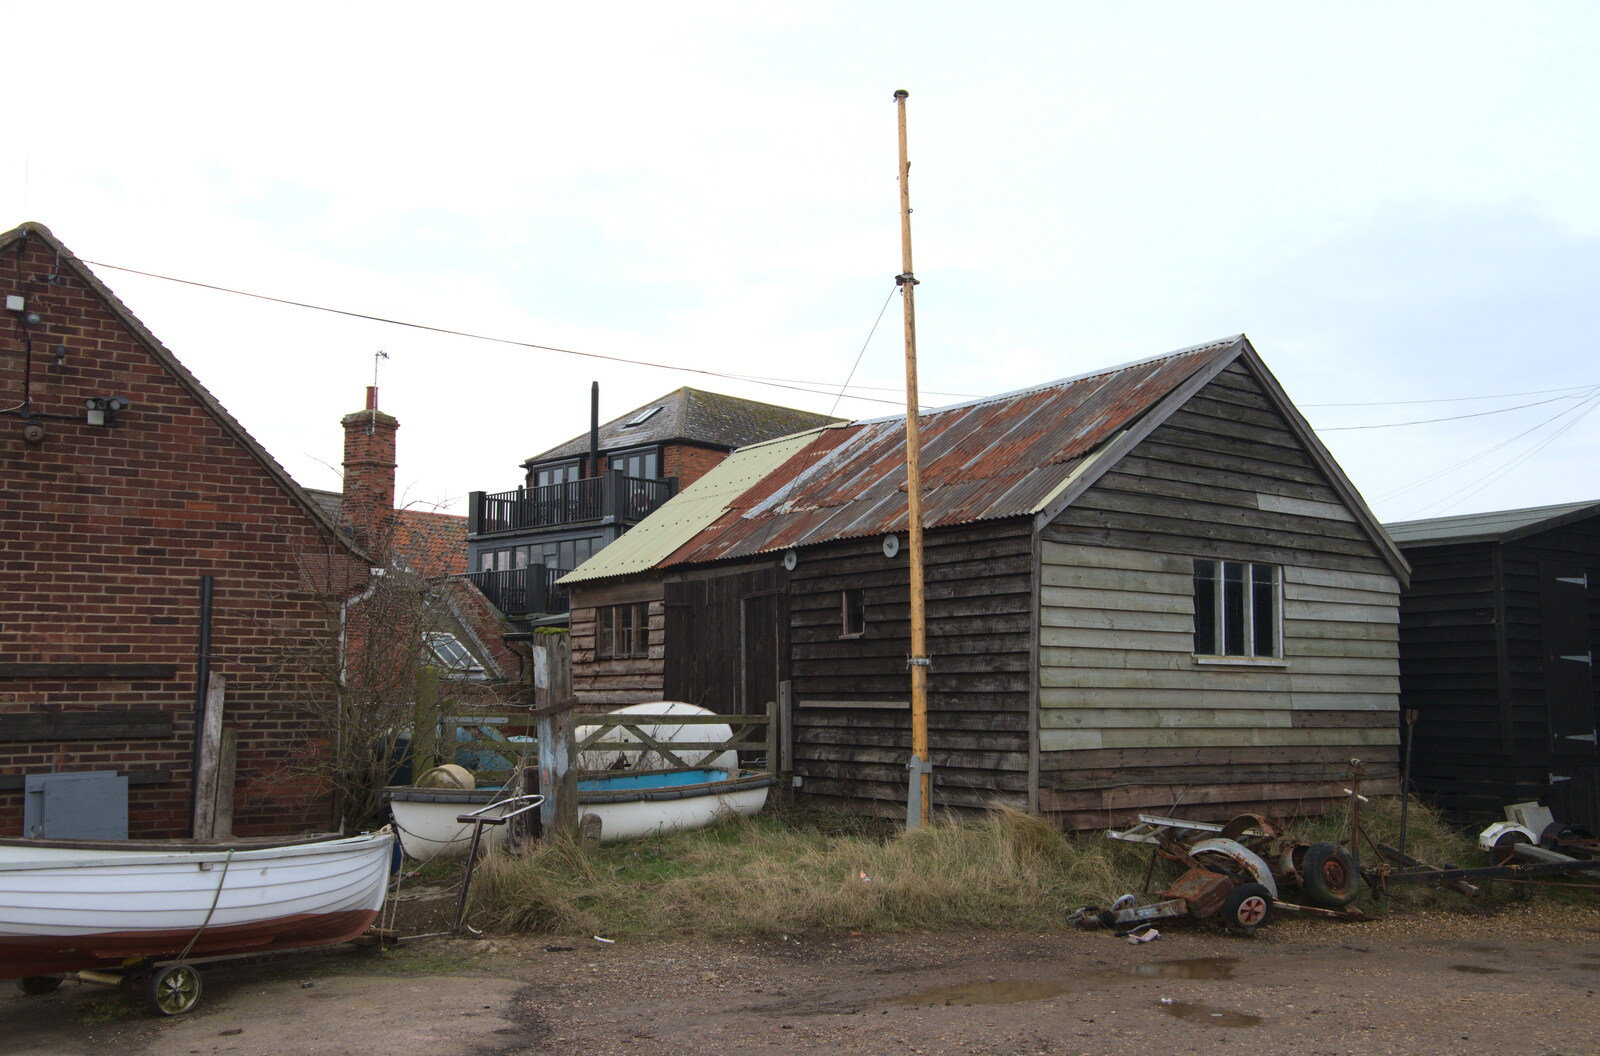 A Trip to Orford, Suffolk - 25th January 2020: More of the boatyard